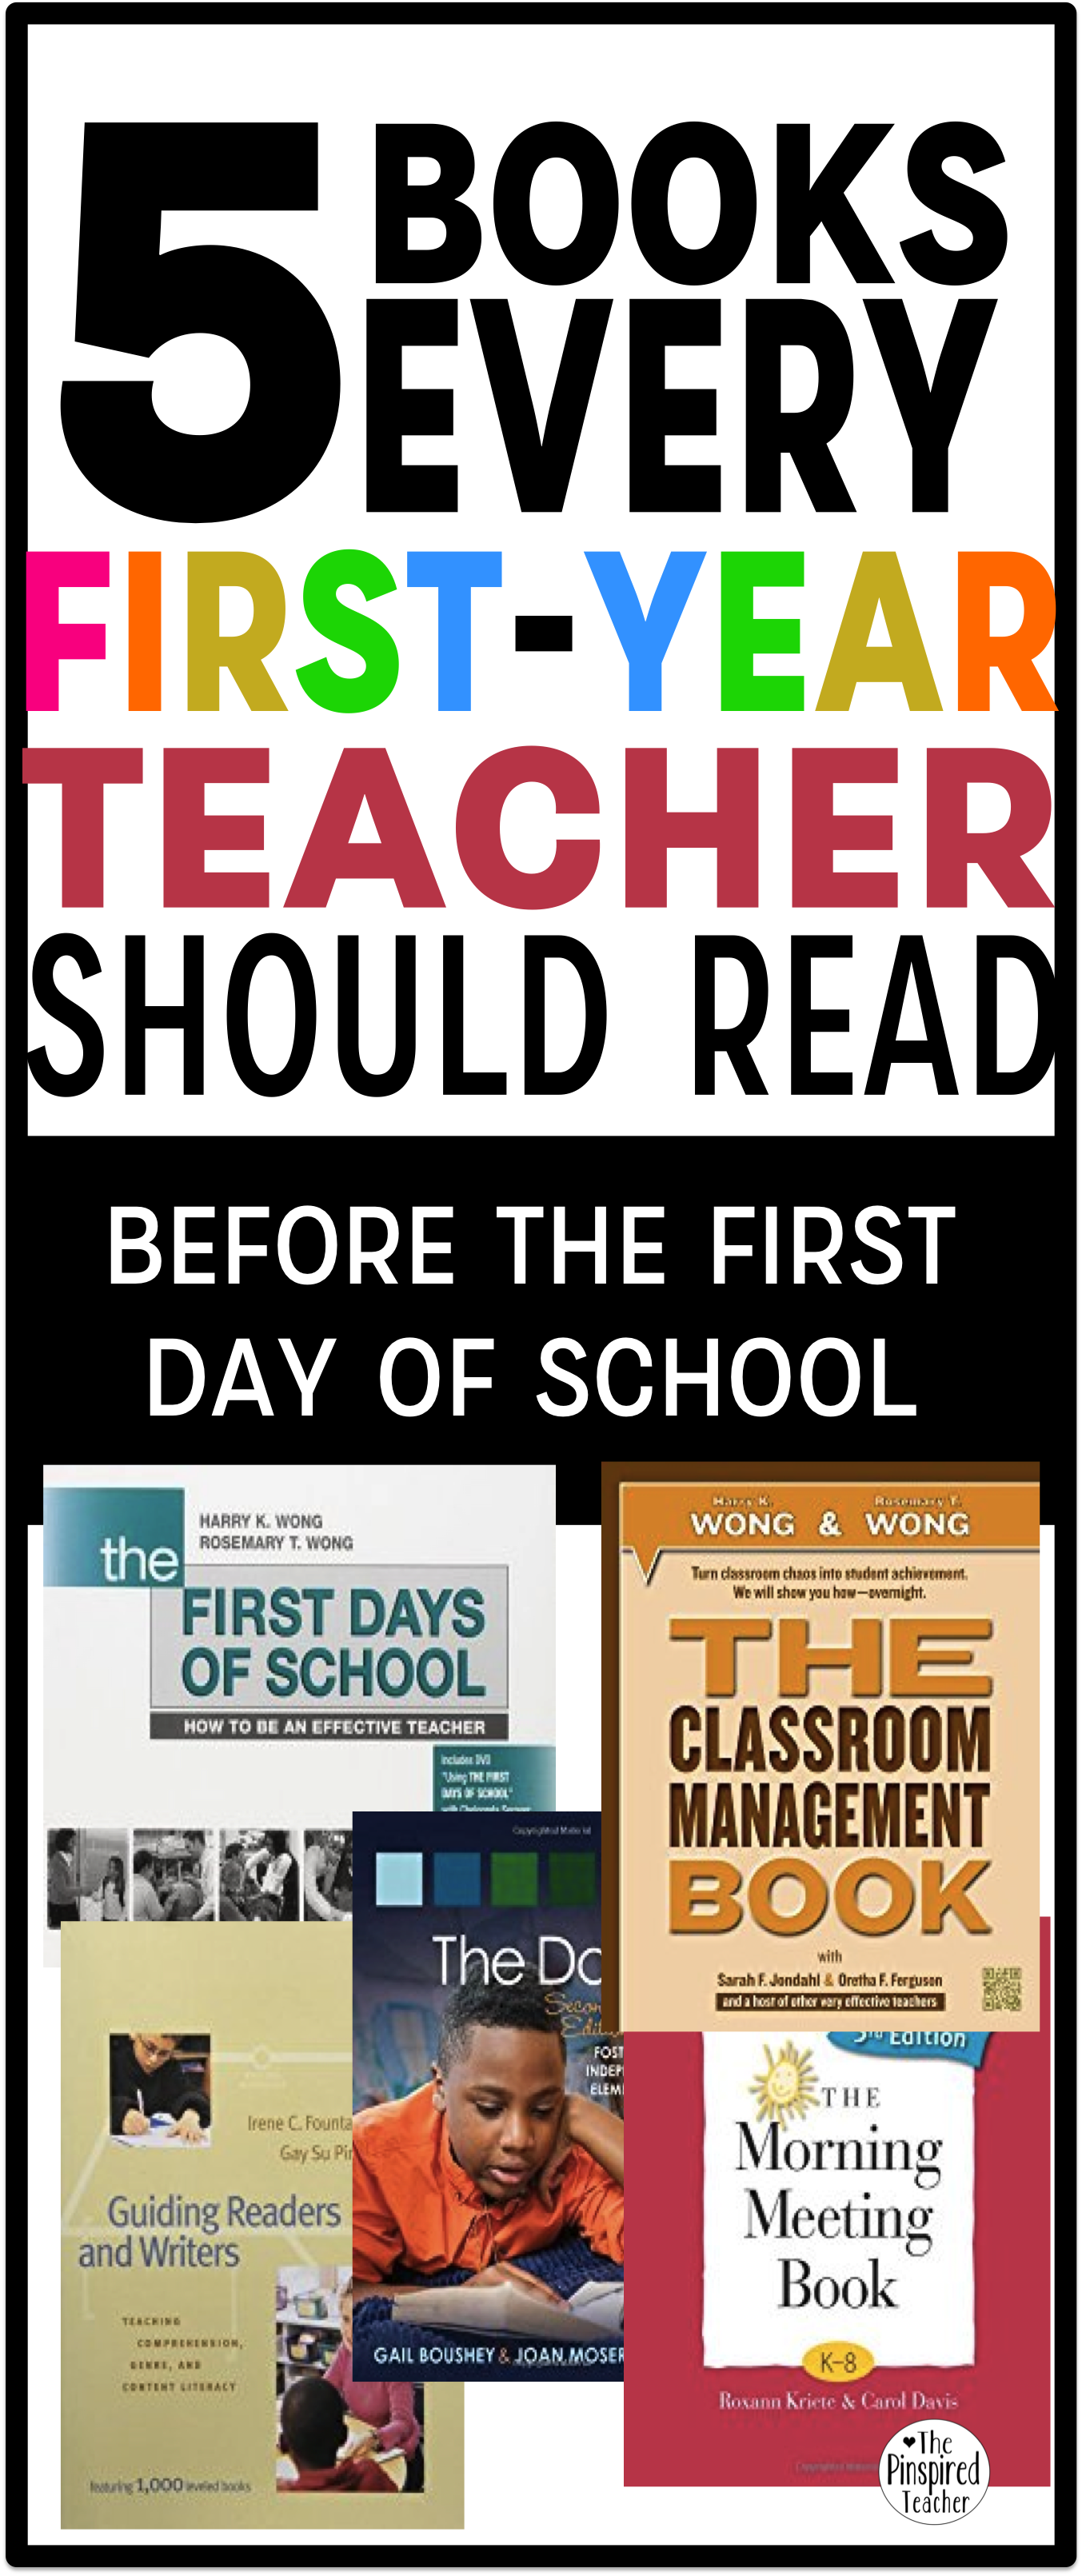 5 books every first-year teacher should read before the last day of school by The Pinspired Teacher